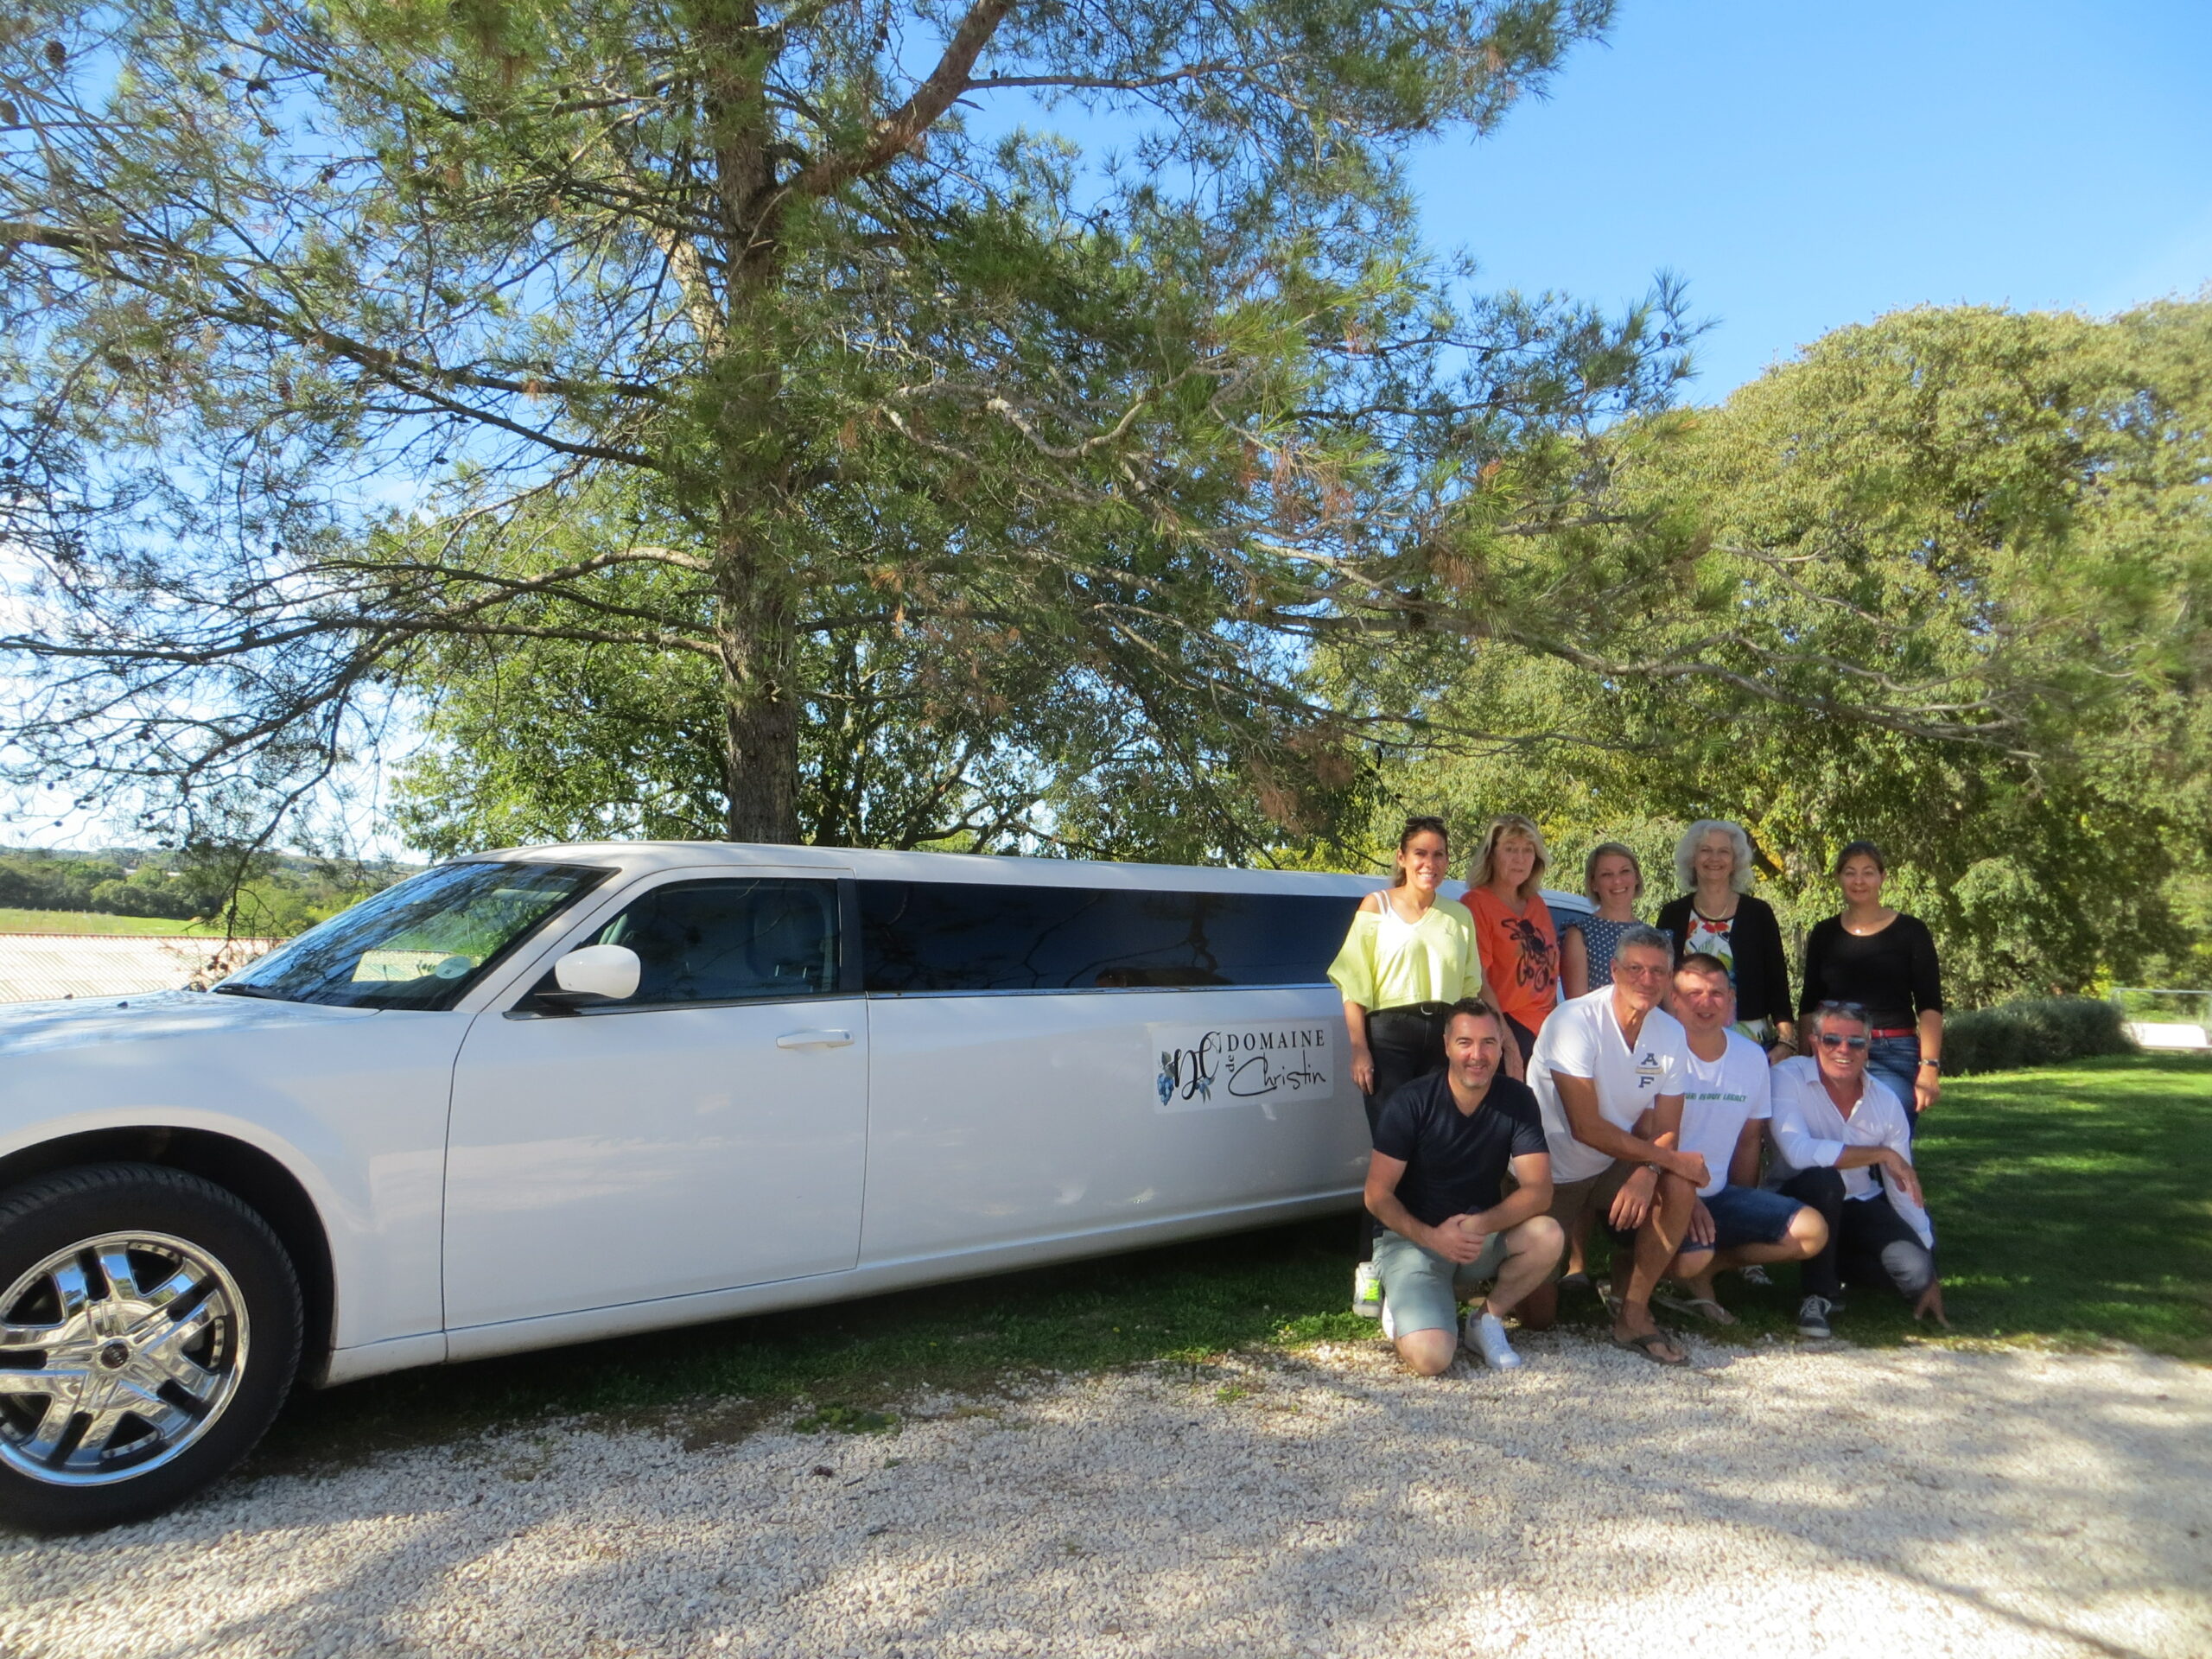 People posing in front of a limousine